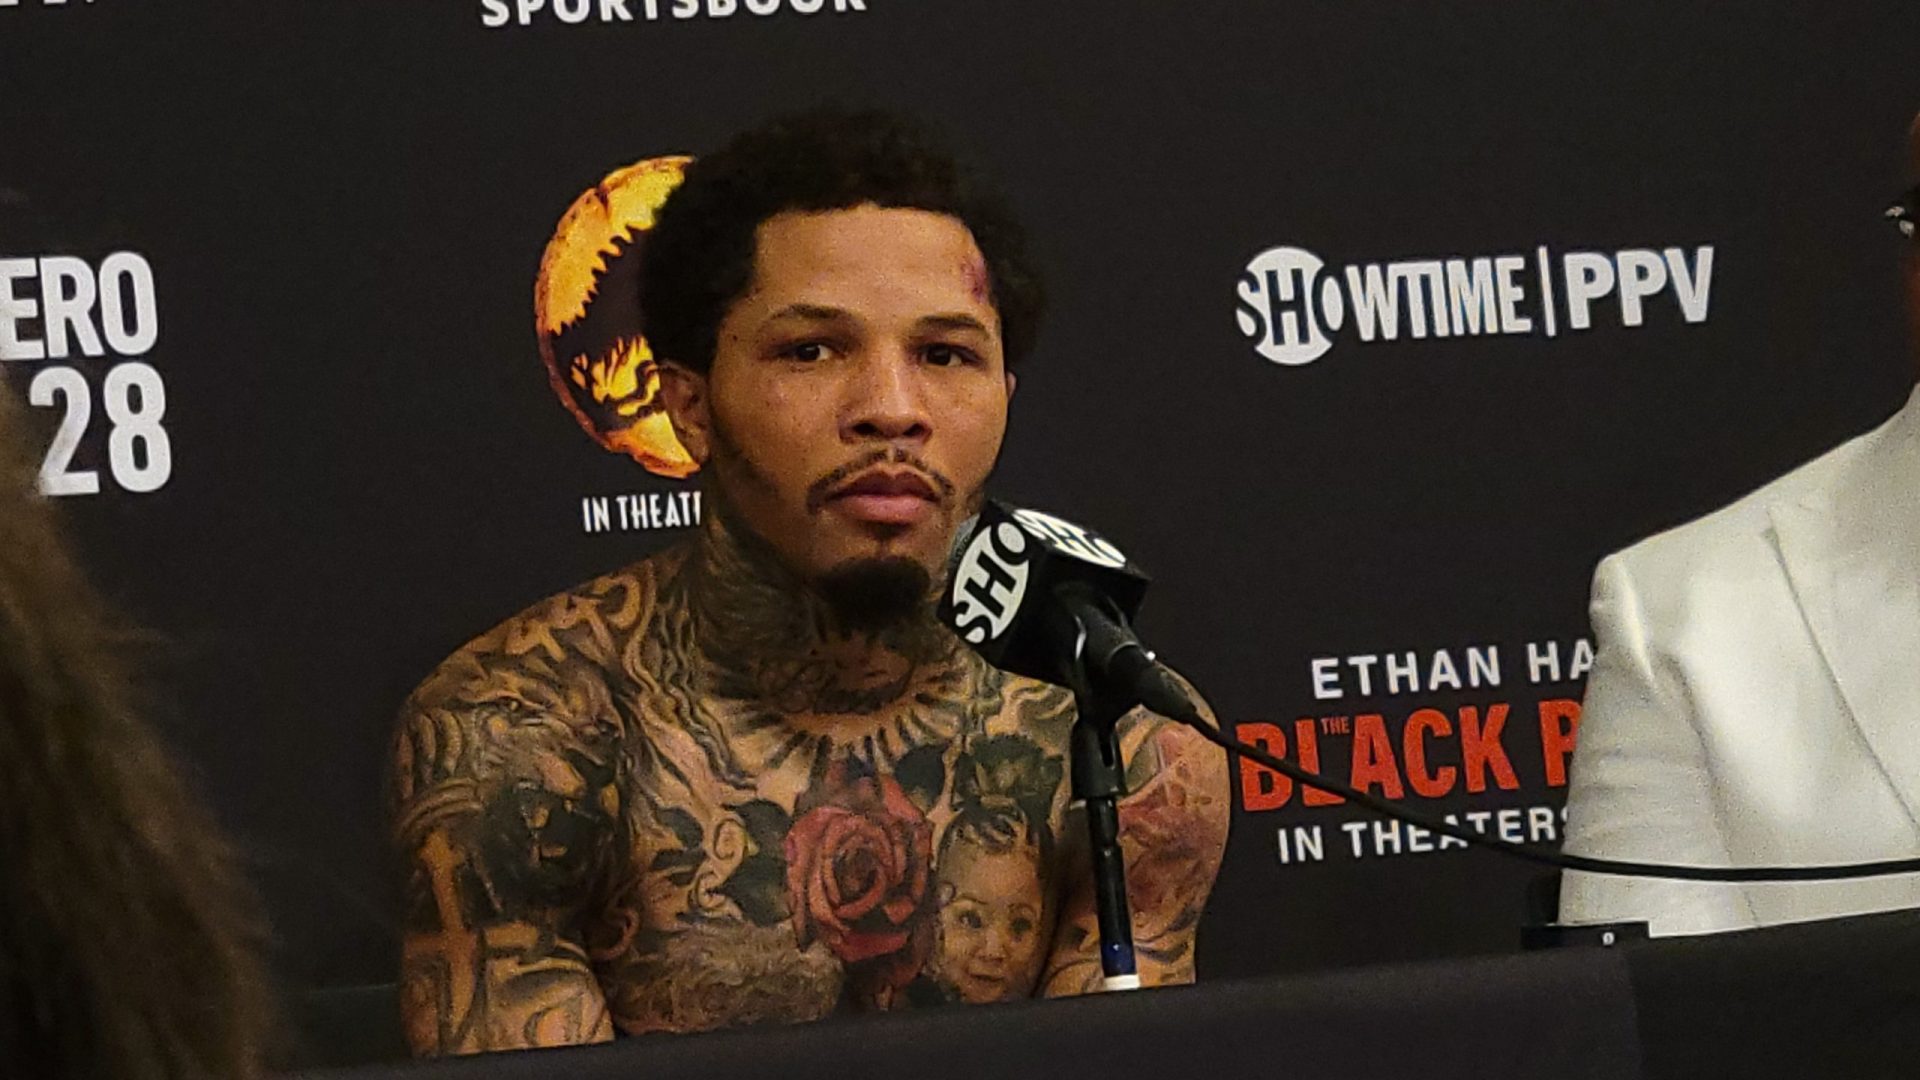 Gervonta Davis Wins Boxing Bout But Allows Opponent To Keep $5M Bet